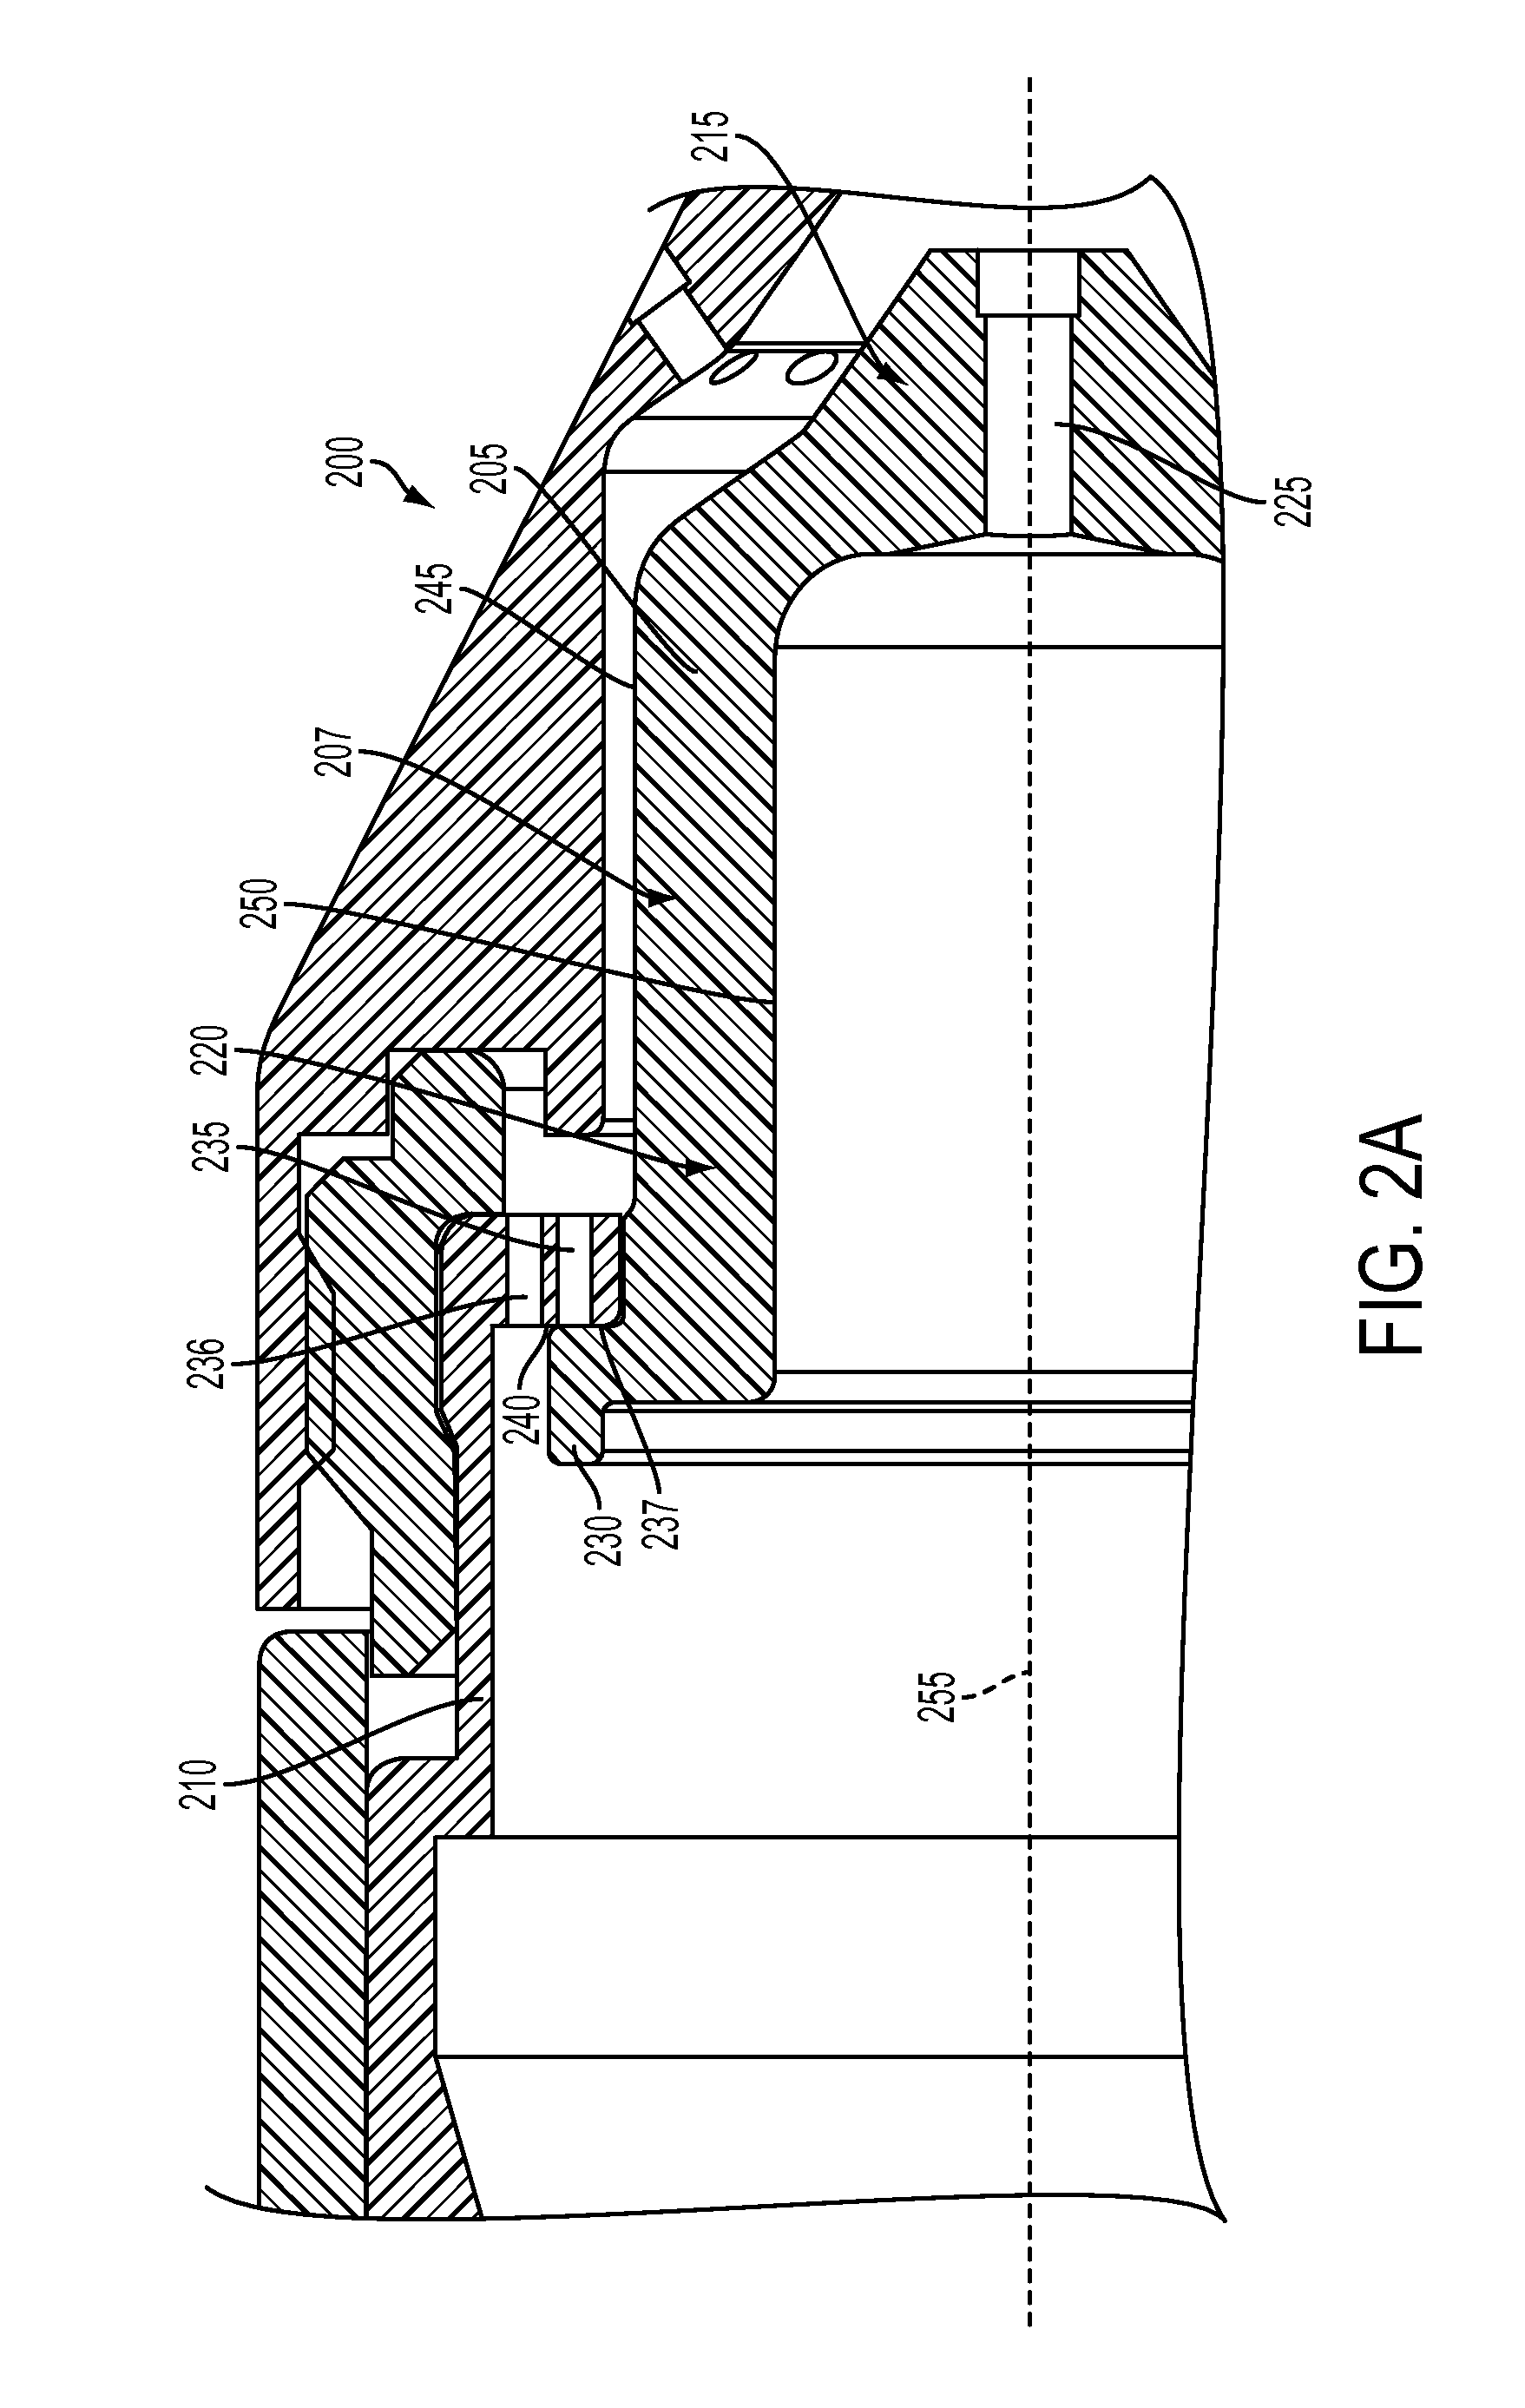 Torch Flow Regulation Using Nozzle Features